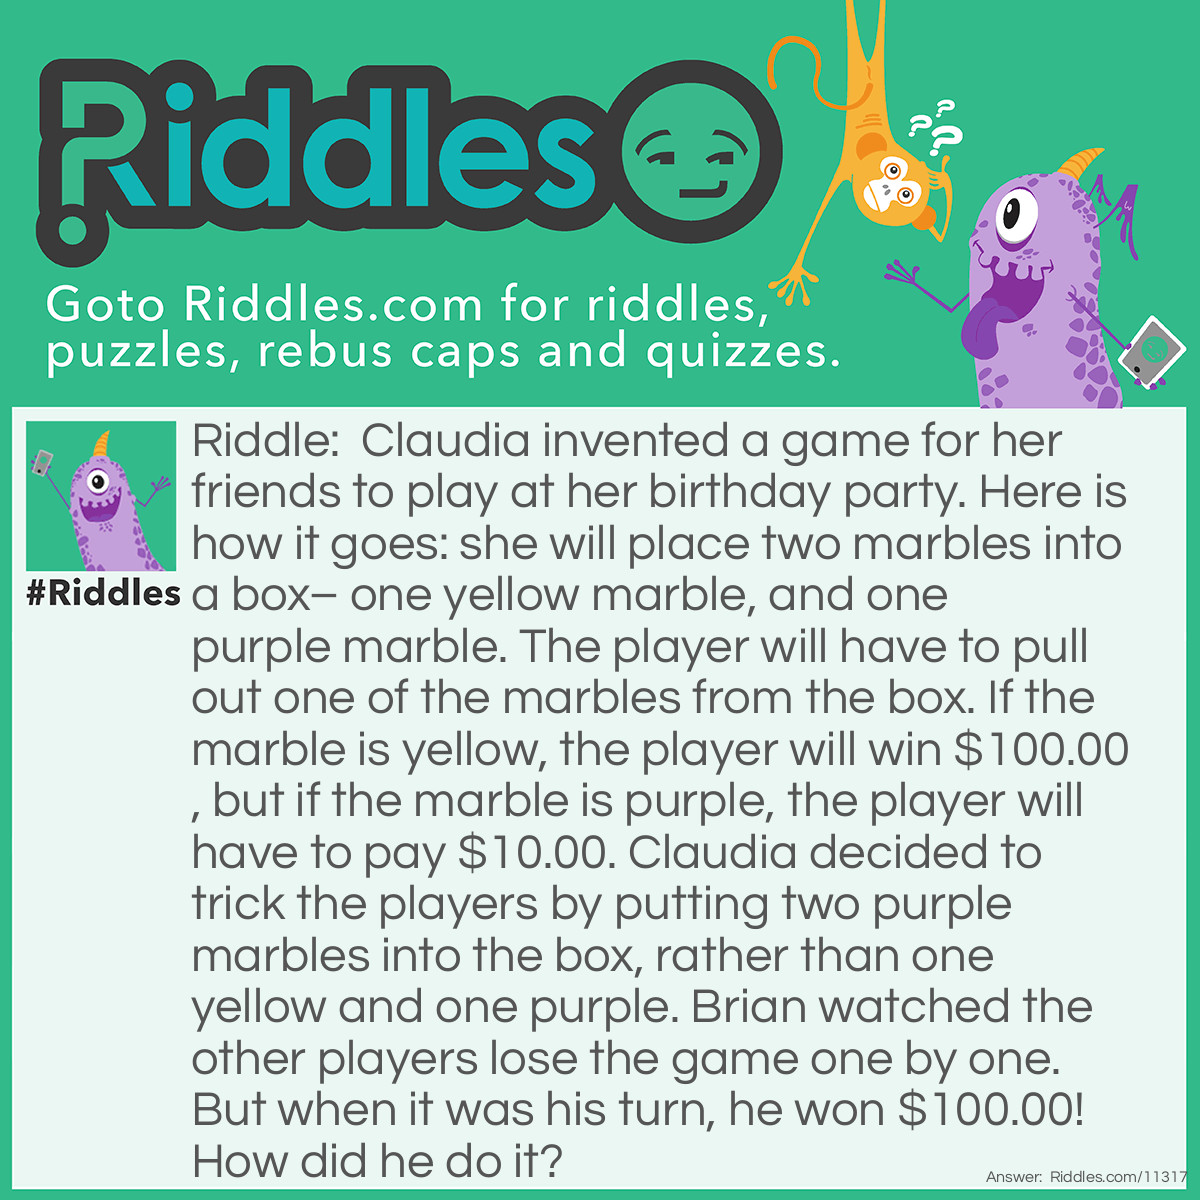 Riddle: Claudia invented a game for her friends to play at her birthday party. Here is how it goes: she will place two marbles into a box– one yellow marble, and one purple marble. The player will have to pull out one of the marbles from the box. If the marble is yellow, the player will win $100.00, but if the marble is purple, the player will have to pay $10.00. Claudia decided to trick the players by putting two purple marbles into the box, rather than one yellow and one purple. Brian watched the other players lose the game one by one. But when it was his turn, he won $100.00! How did he do it? Answer: Brian pulled out one of the marbles, and, without showing it to anyone, quickly put it in his mouth, being careful not to swallow it. Then, he pulled out the remaining marble, which was purple, and showed it to everybody. According to the rules, it meant that the marble Brian had chosen was yellow. Claudia had to admit it, otherwise, everyone at the party would know that she was a liar.